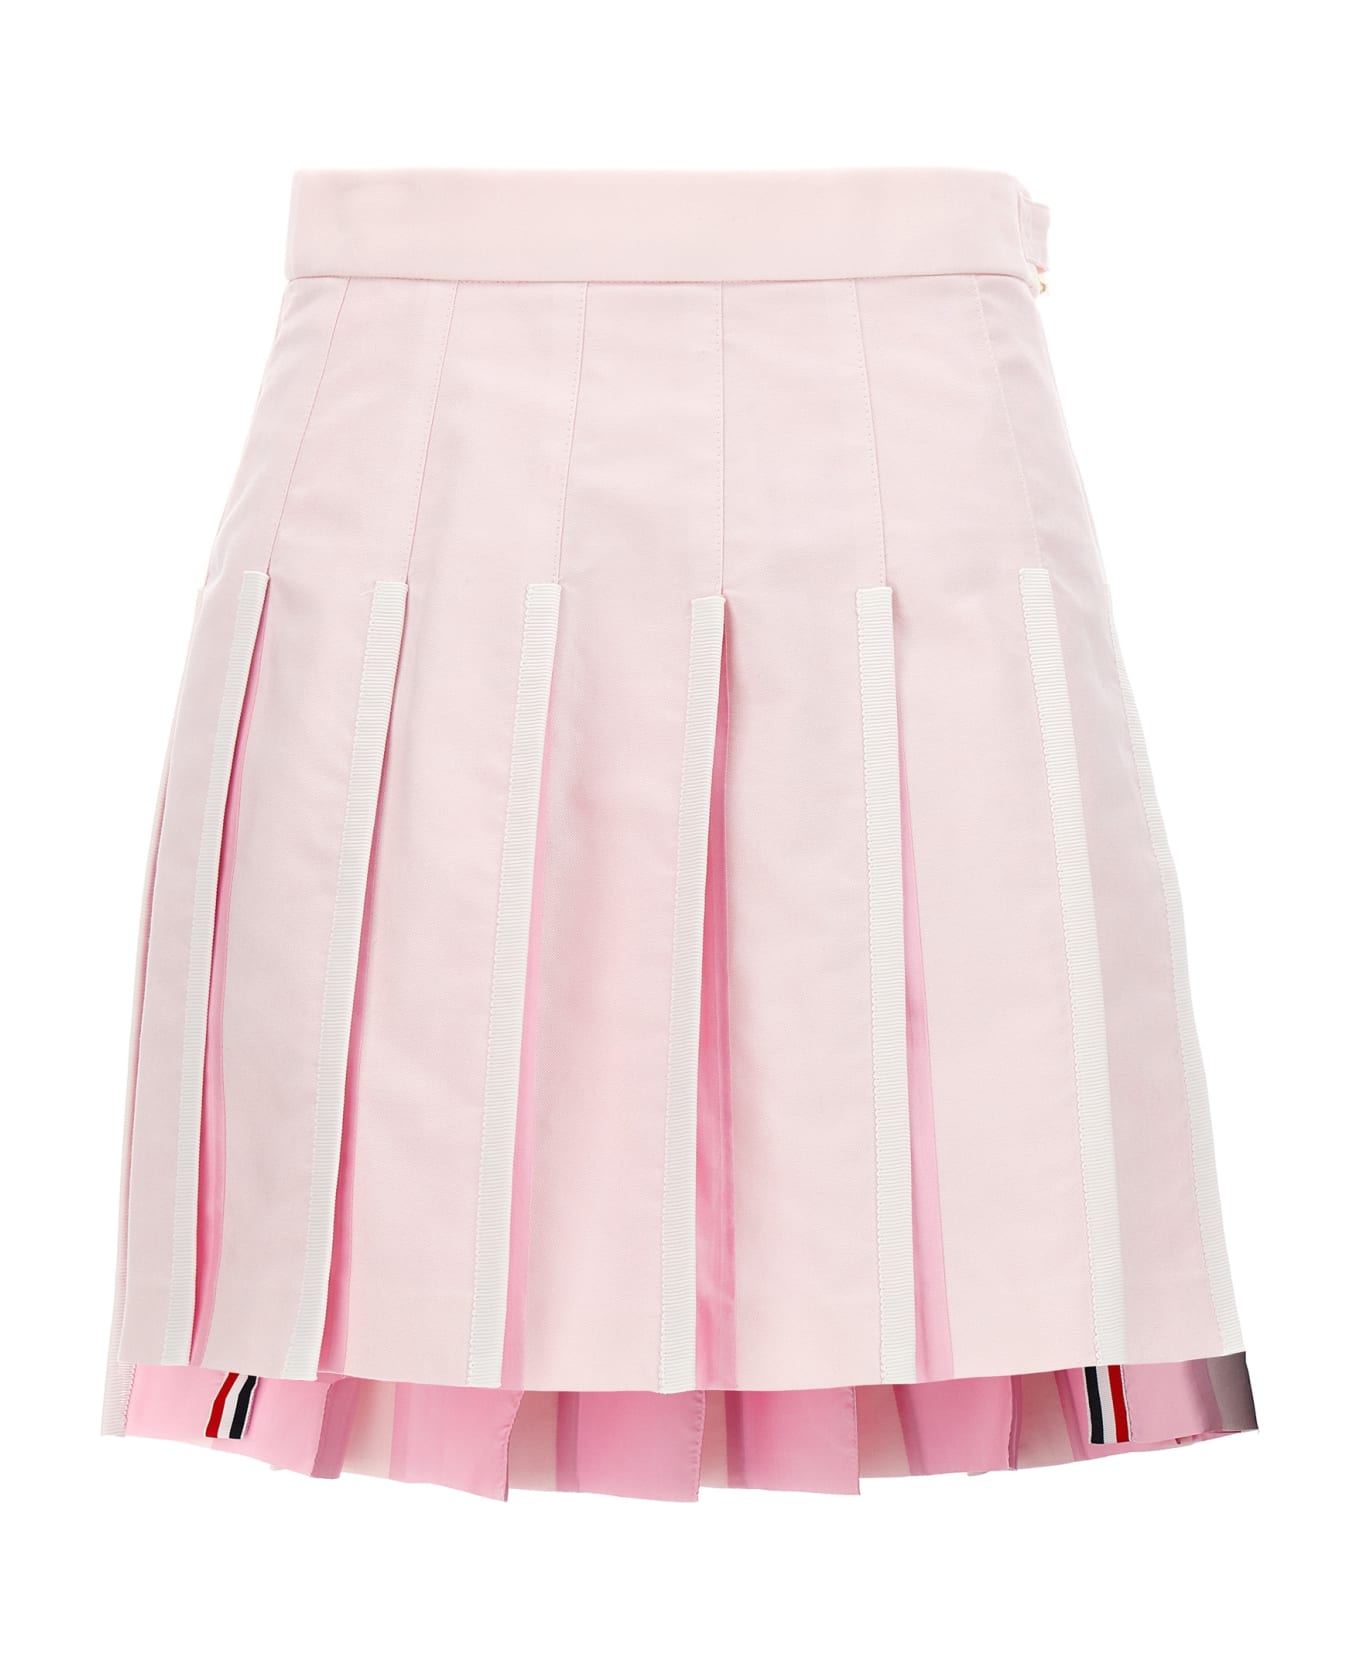 Thom Browne Pleated Oxford Skirt - Pink スカート